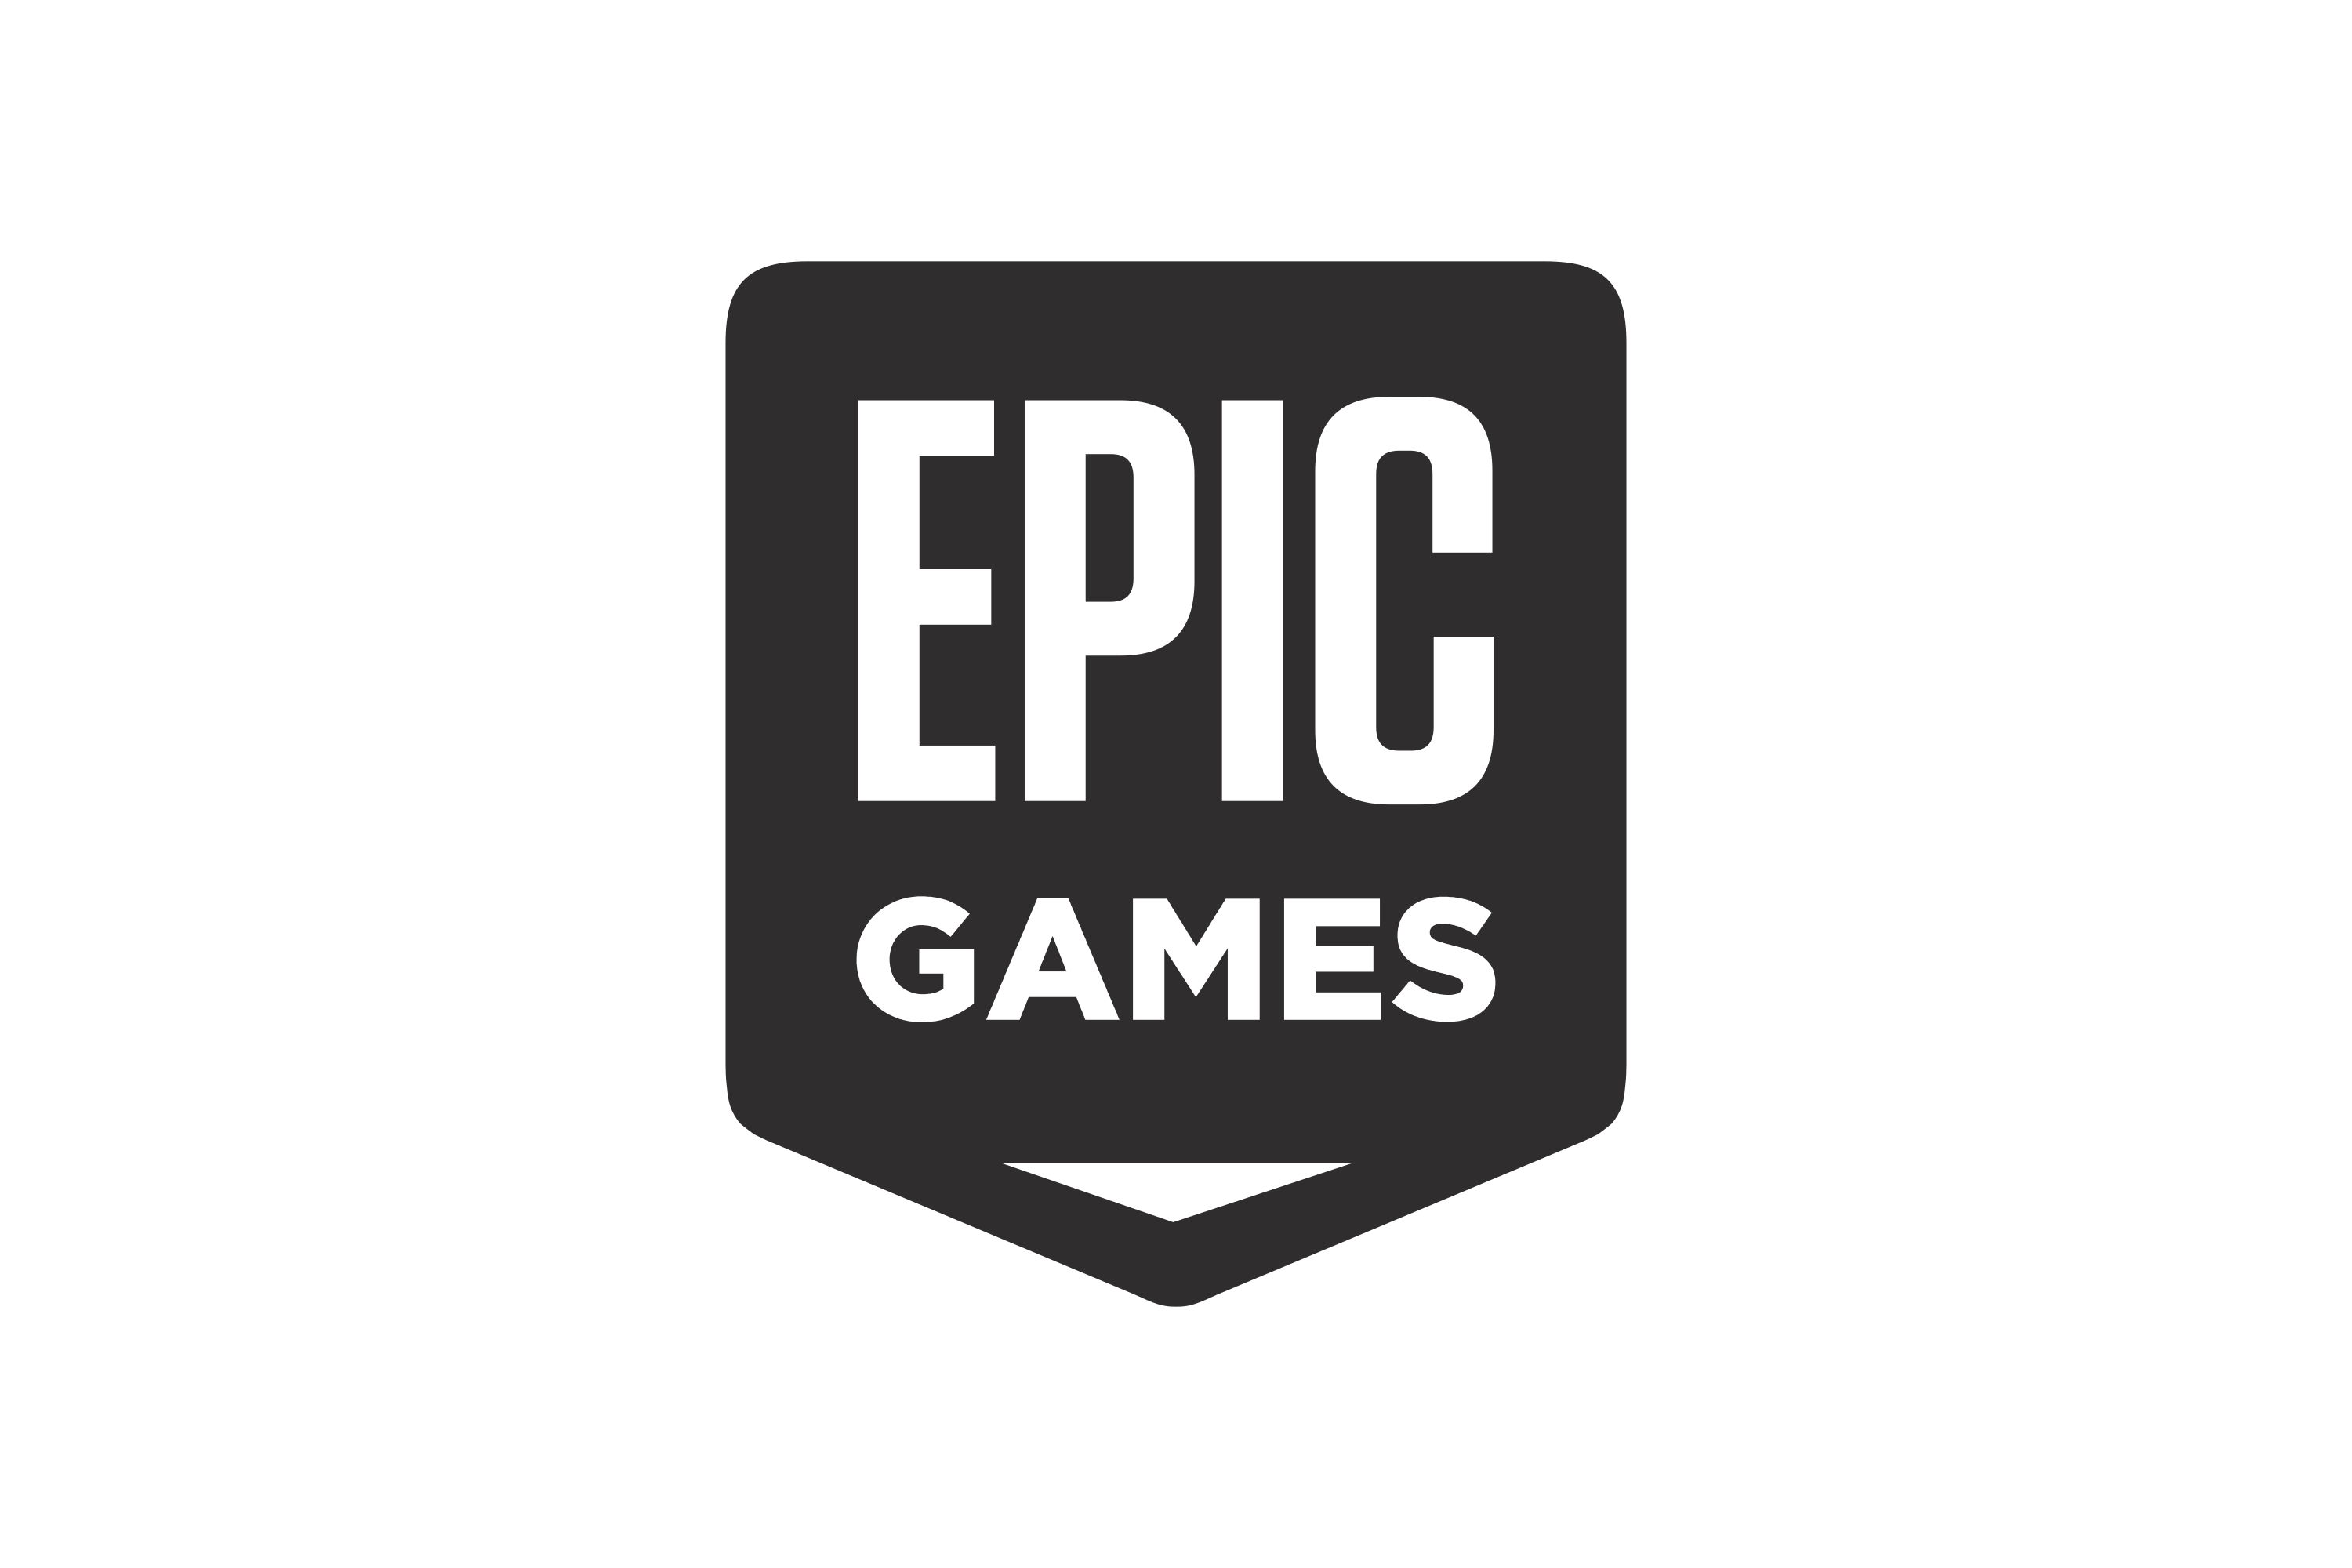 Download Epic Games (Potomac Computer Systems, Epic MegaGames, Inc.) Logo  in SVG Vector or PNG File Format 